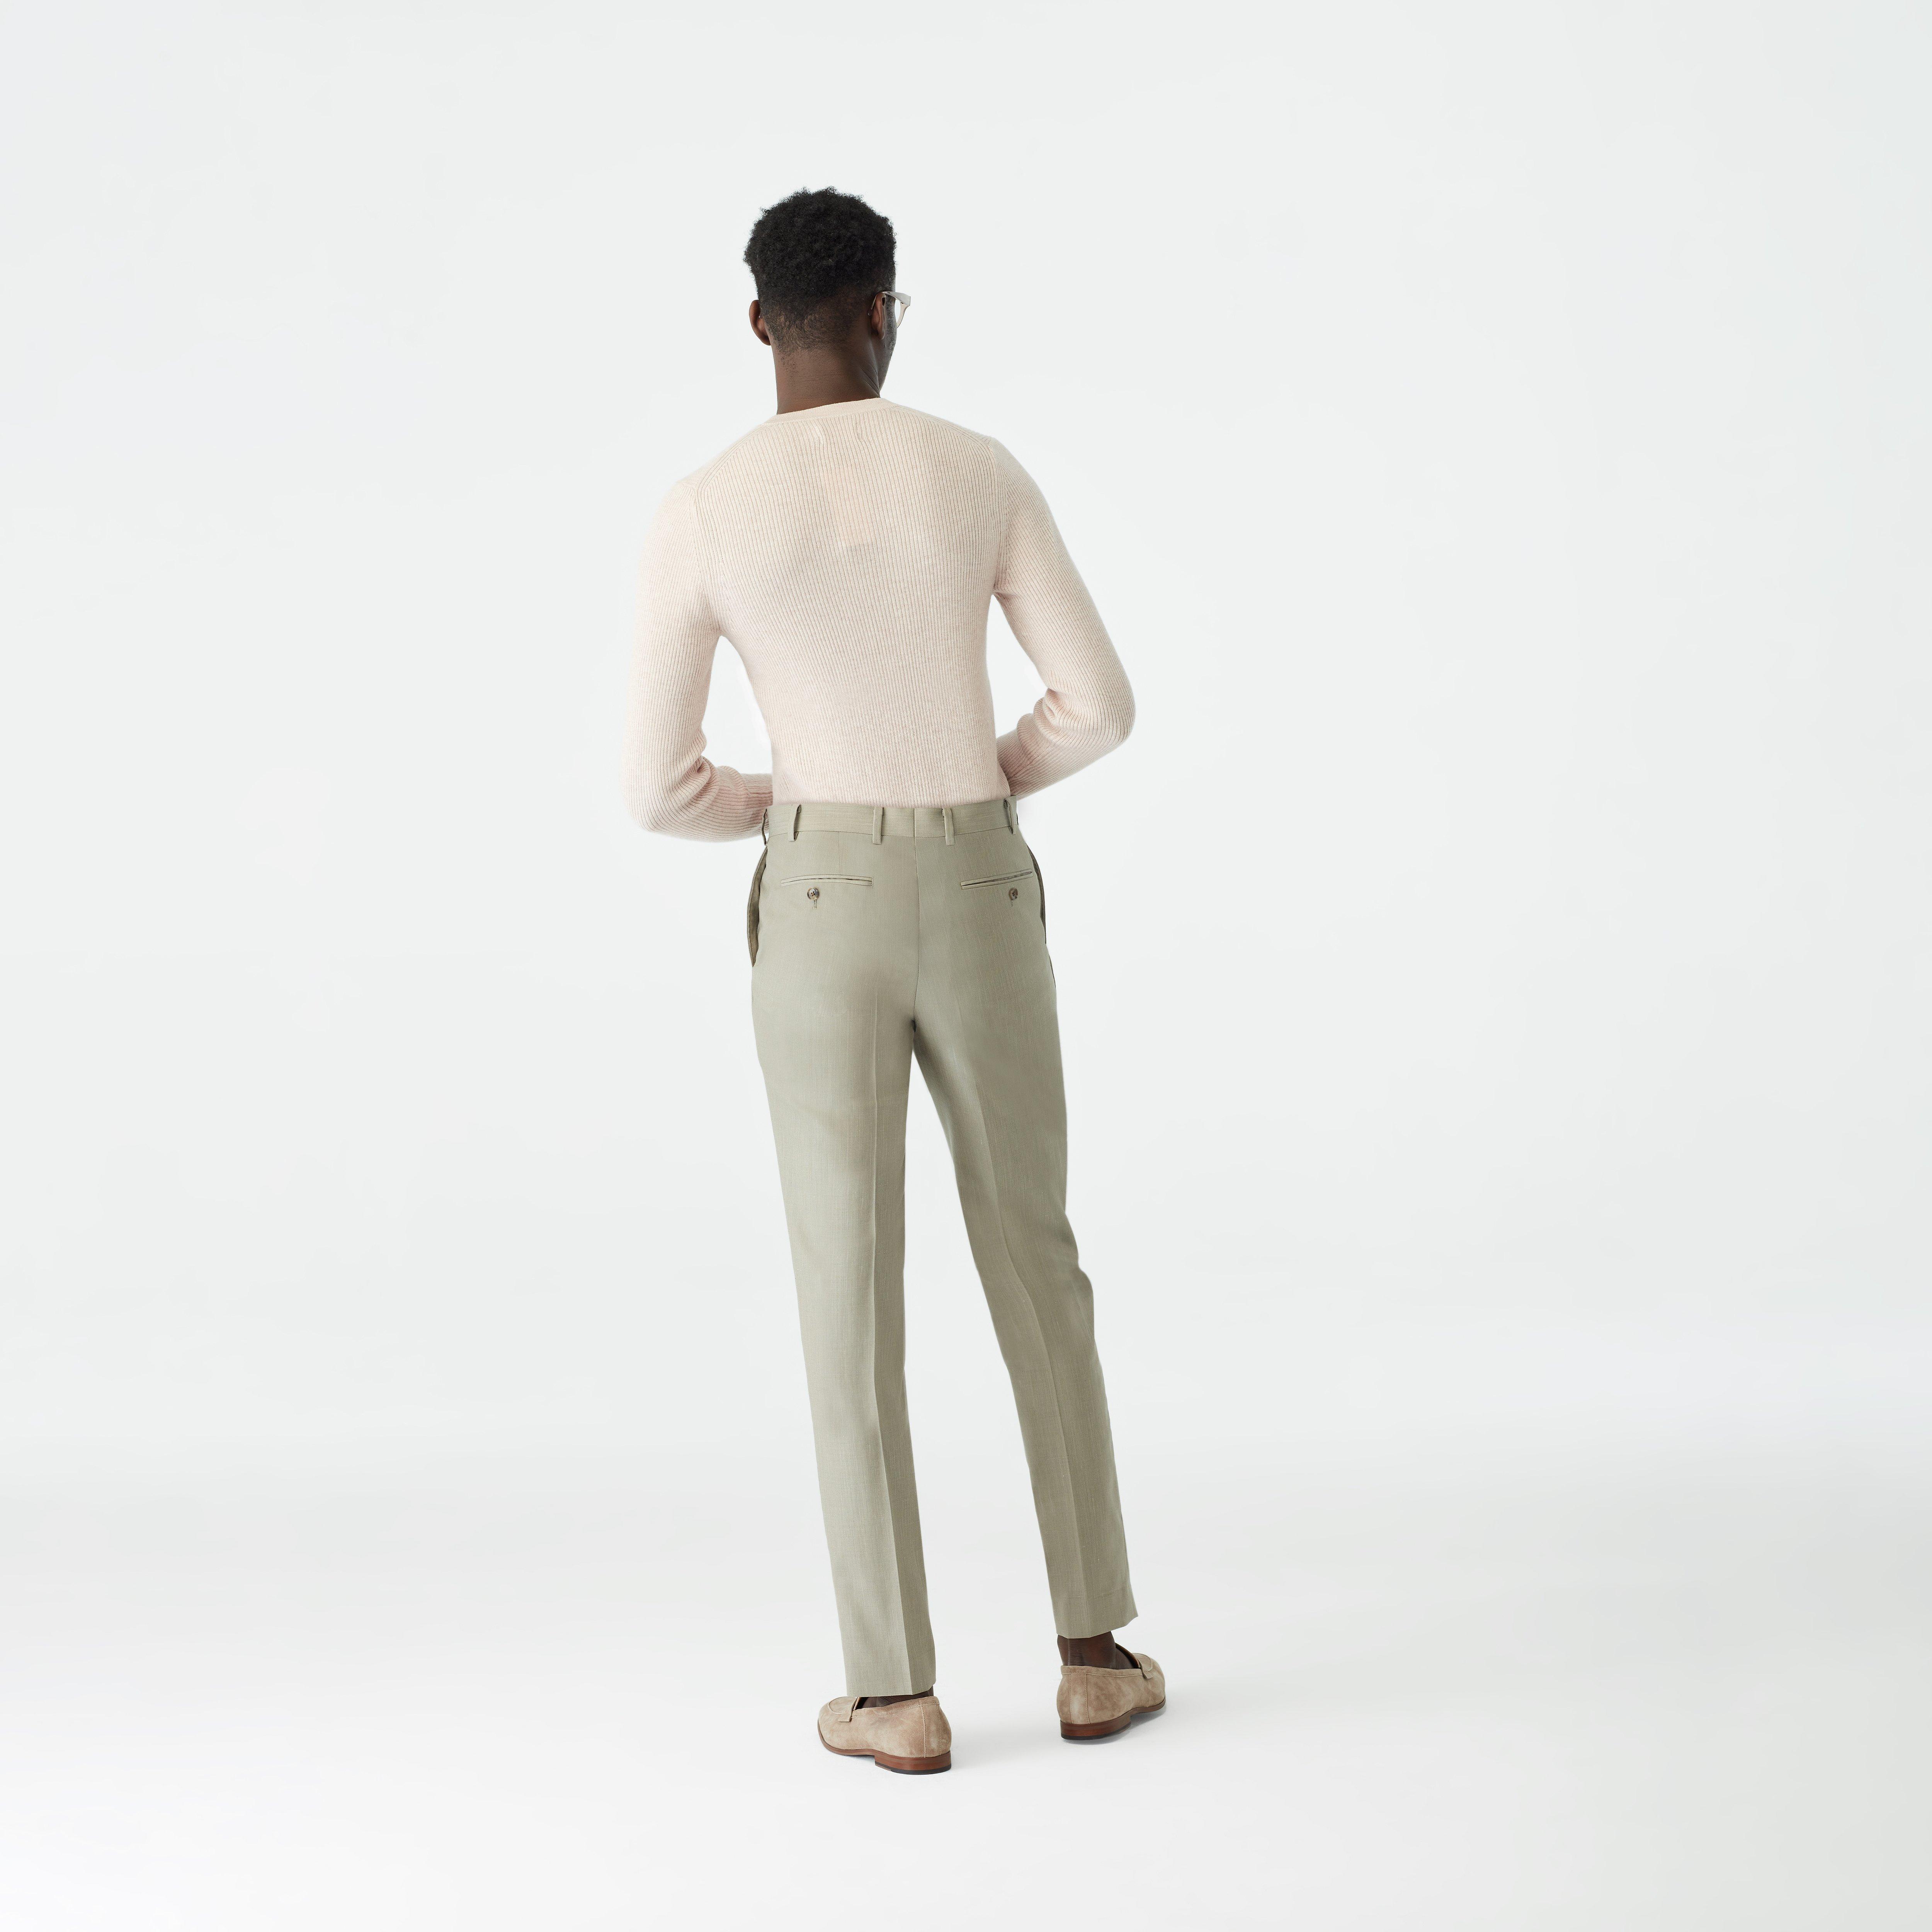 Custom Suits Made For You - Kirkhill Nailhead Sage Suit | INDOCHINO